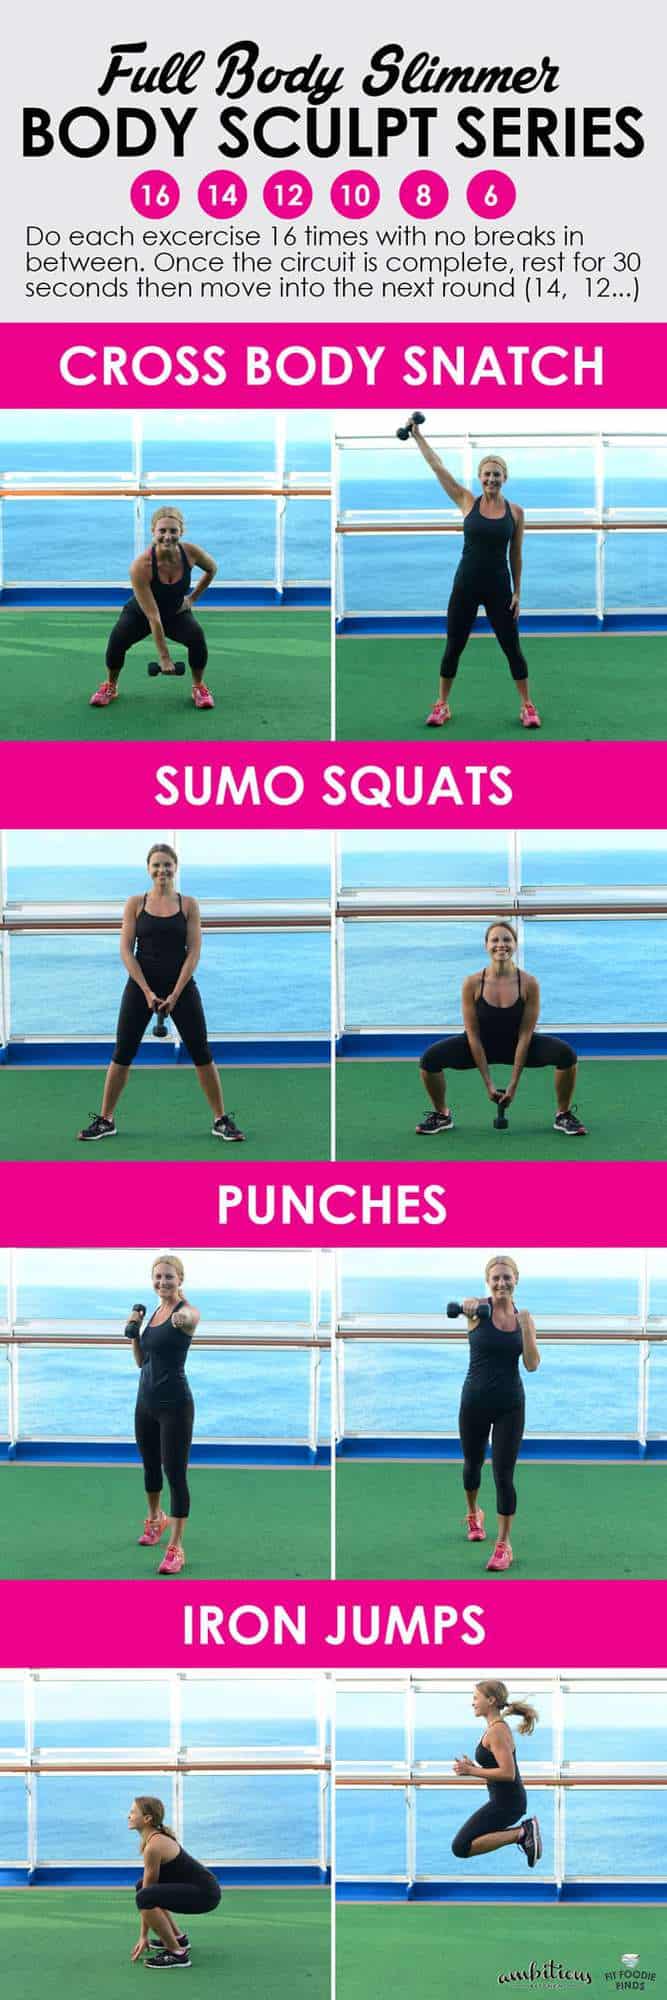 Got 30 minutes? Go hard for a half an hour and do this full-body workout mixing lower body, upper body, and cardio so that you'll feel the burn the next day!